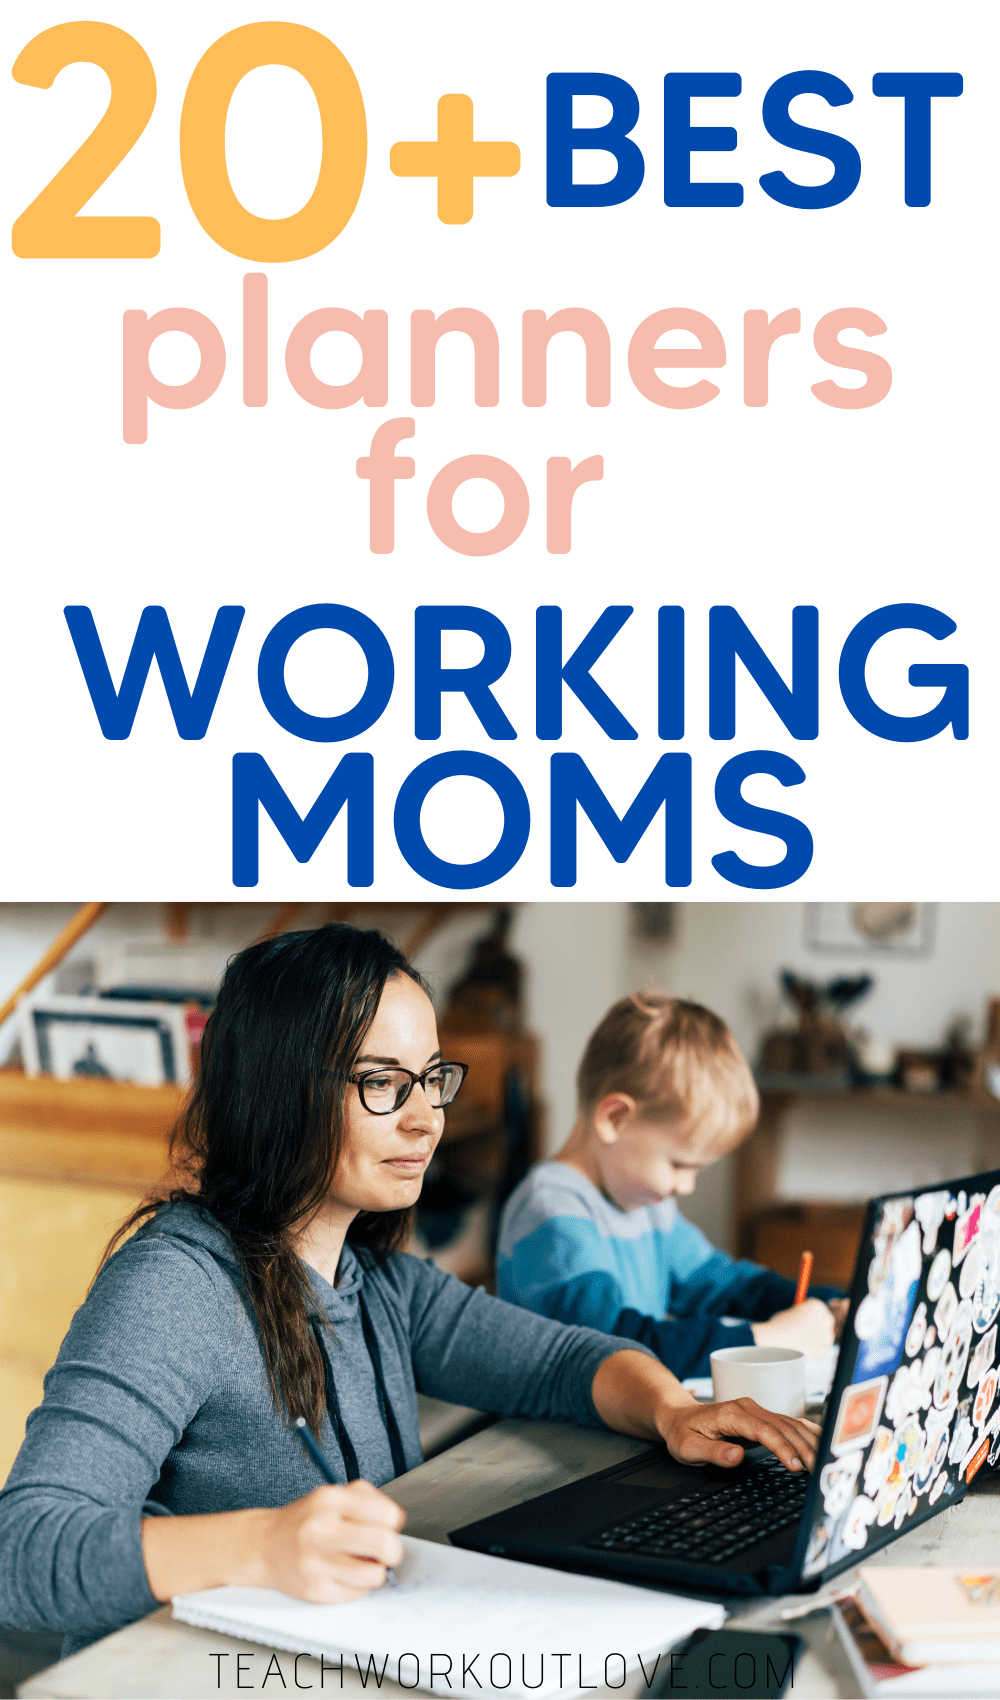 If you are looking for the best planners for working moms in 2020/21, I have 20+ great options for you here with prices and features.